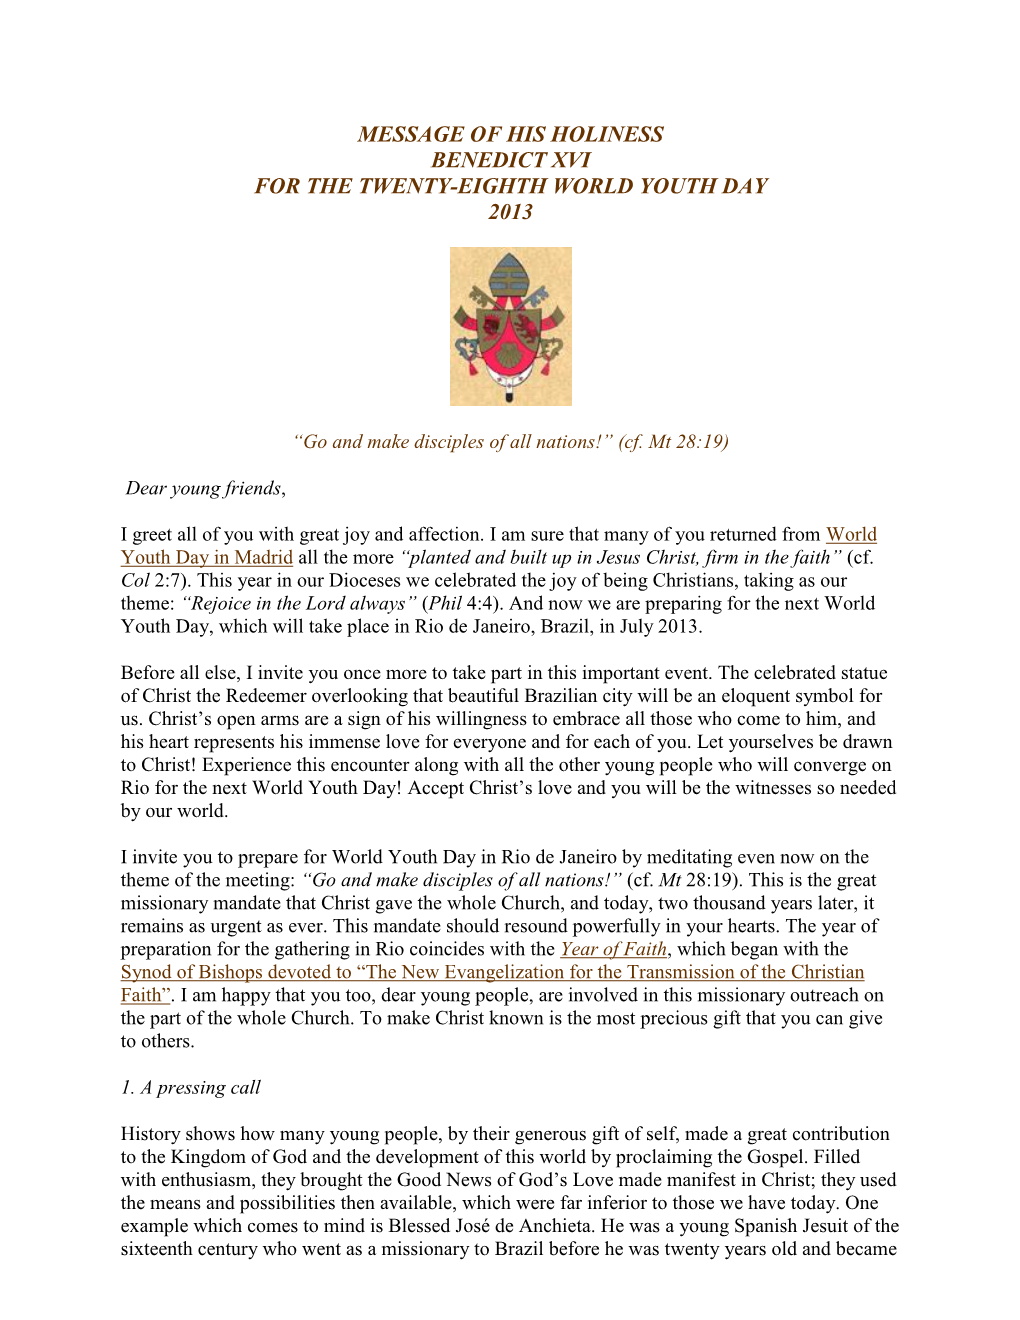 Message of His Holiness Benedict Xvi for the Twenty-Eighth World Youth Day 2013